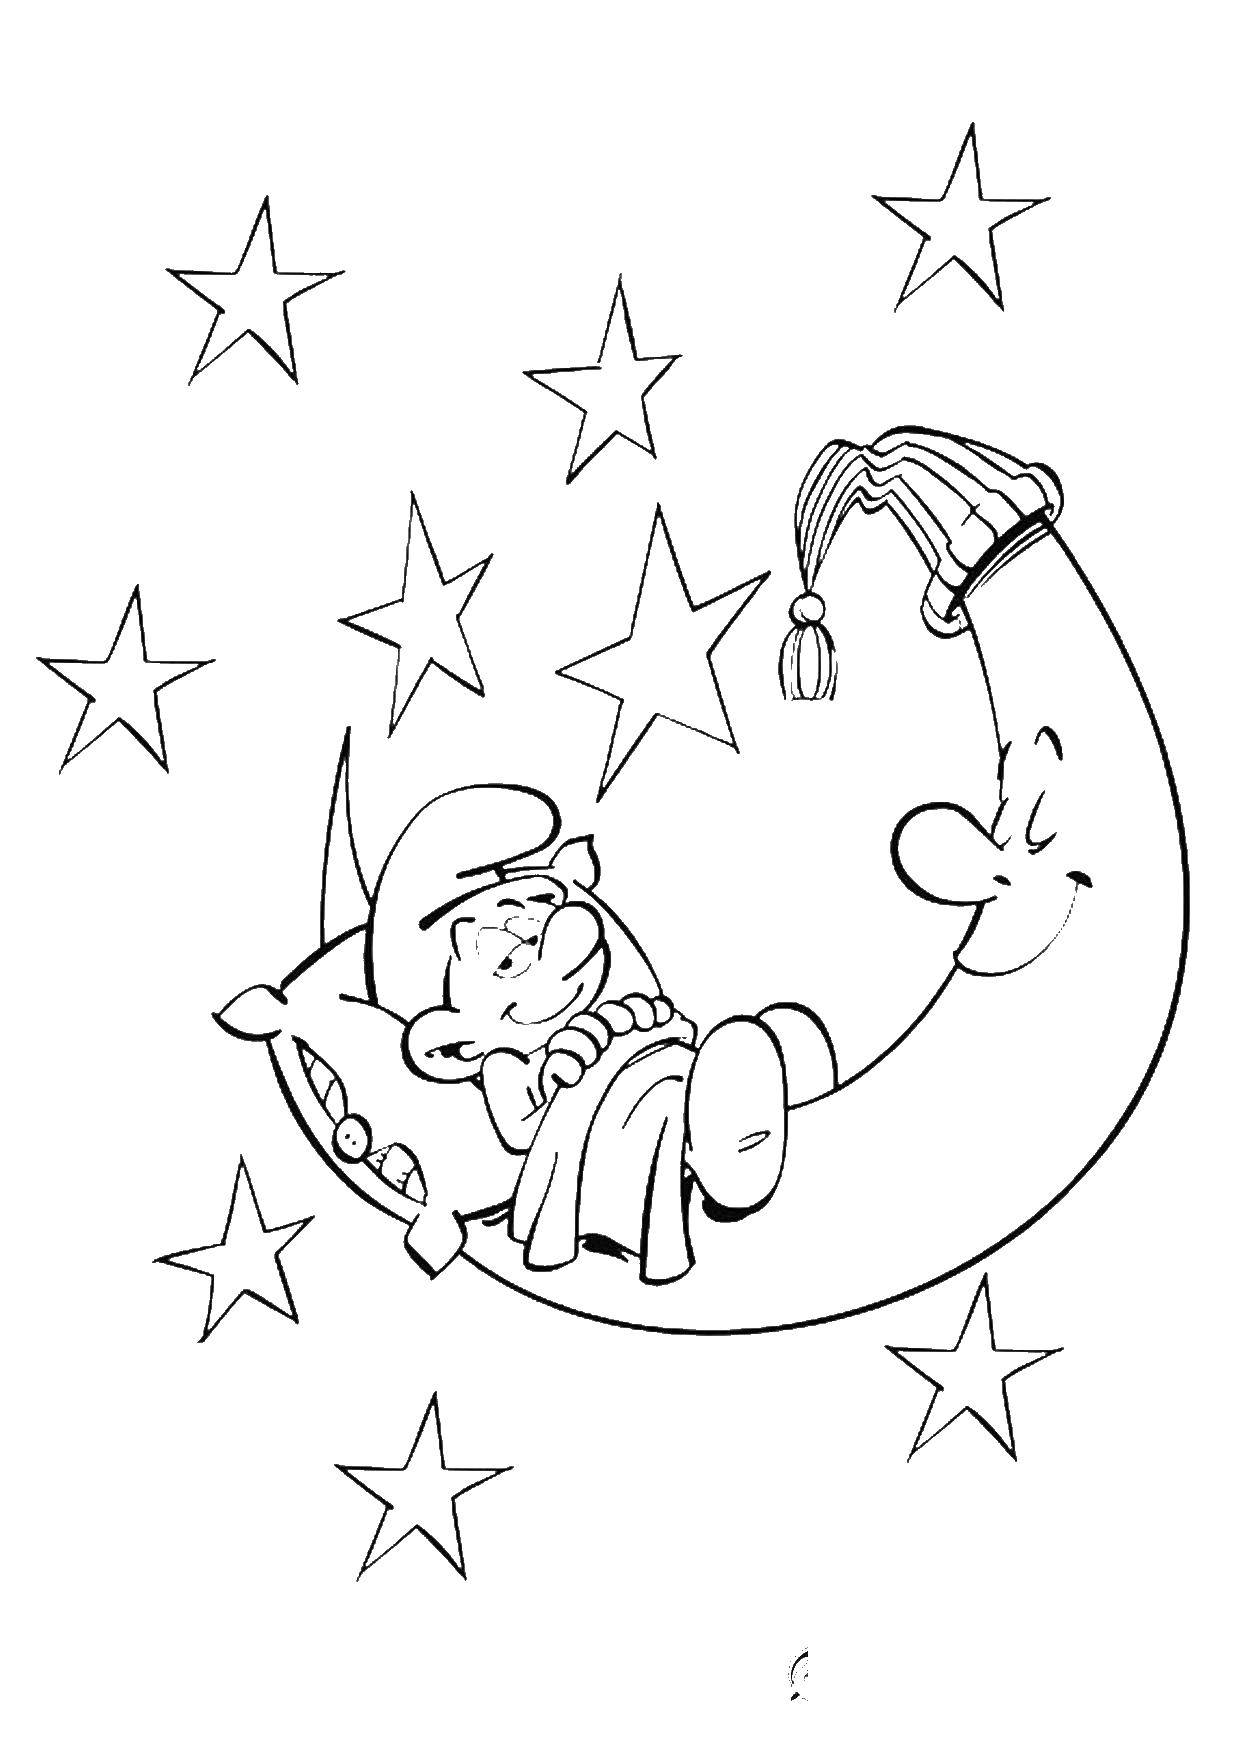 Coloring Smurf sleeping on the moon. Category moon. Tags:  Princess, moon.